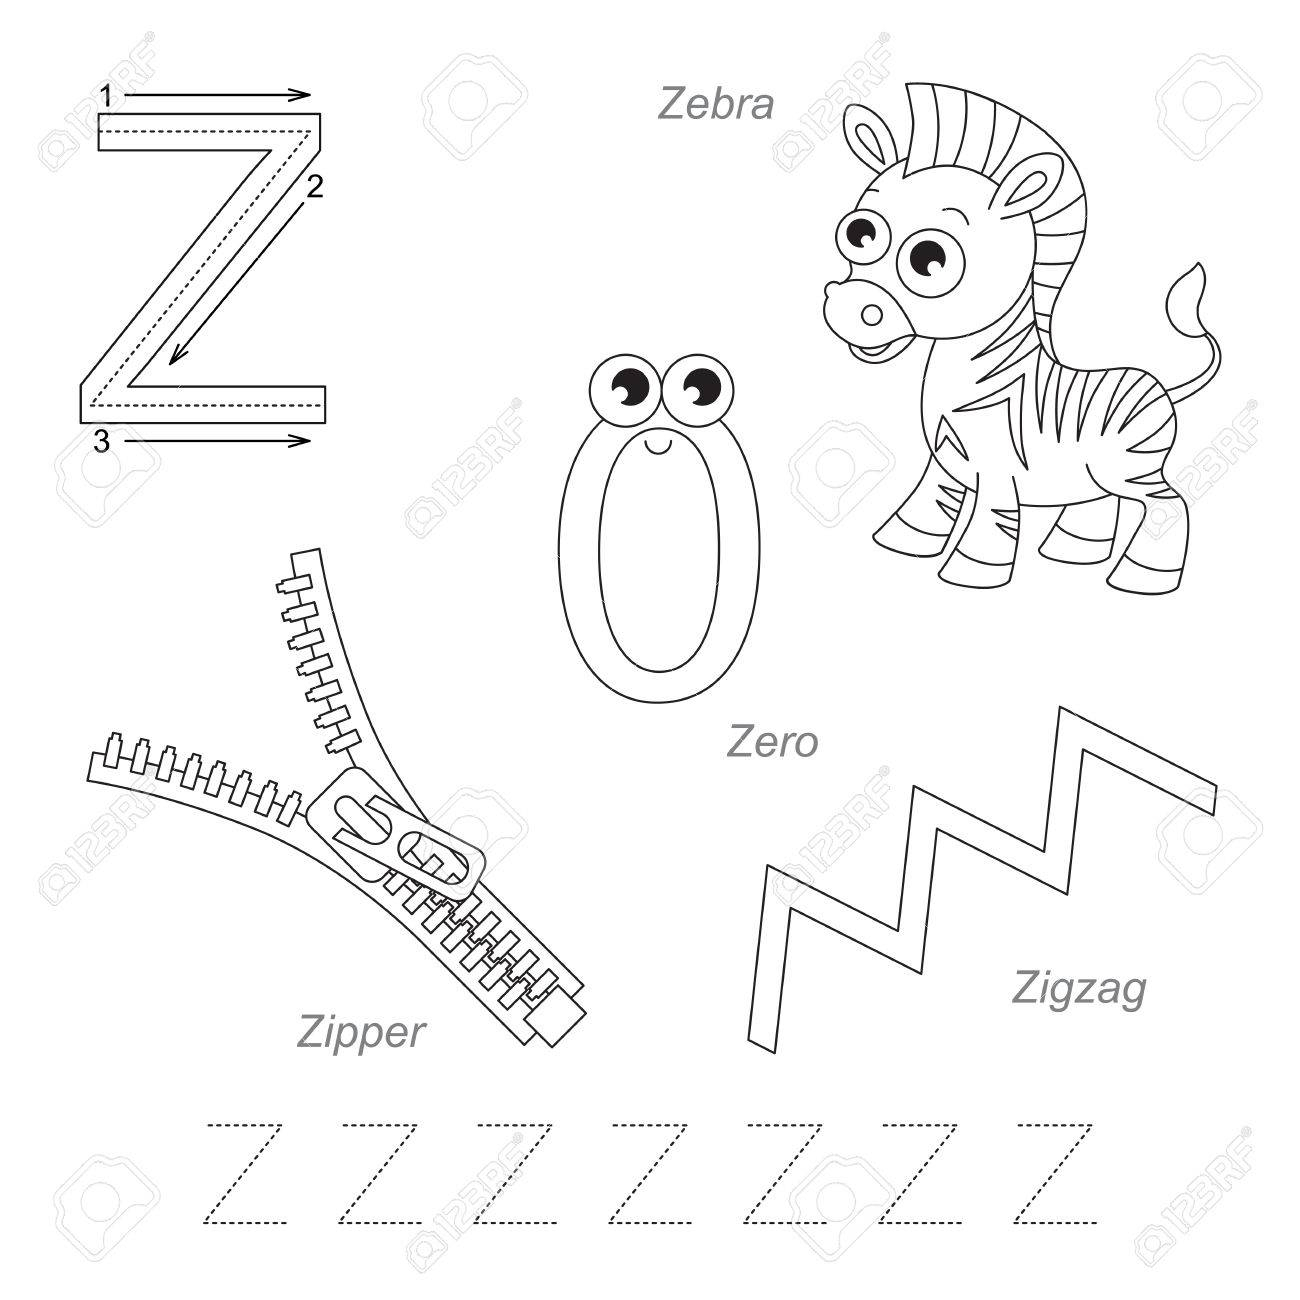 Tracing Worksheet For Children. Full English Alphabet From A.. intended for Letter Z Tracing Page